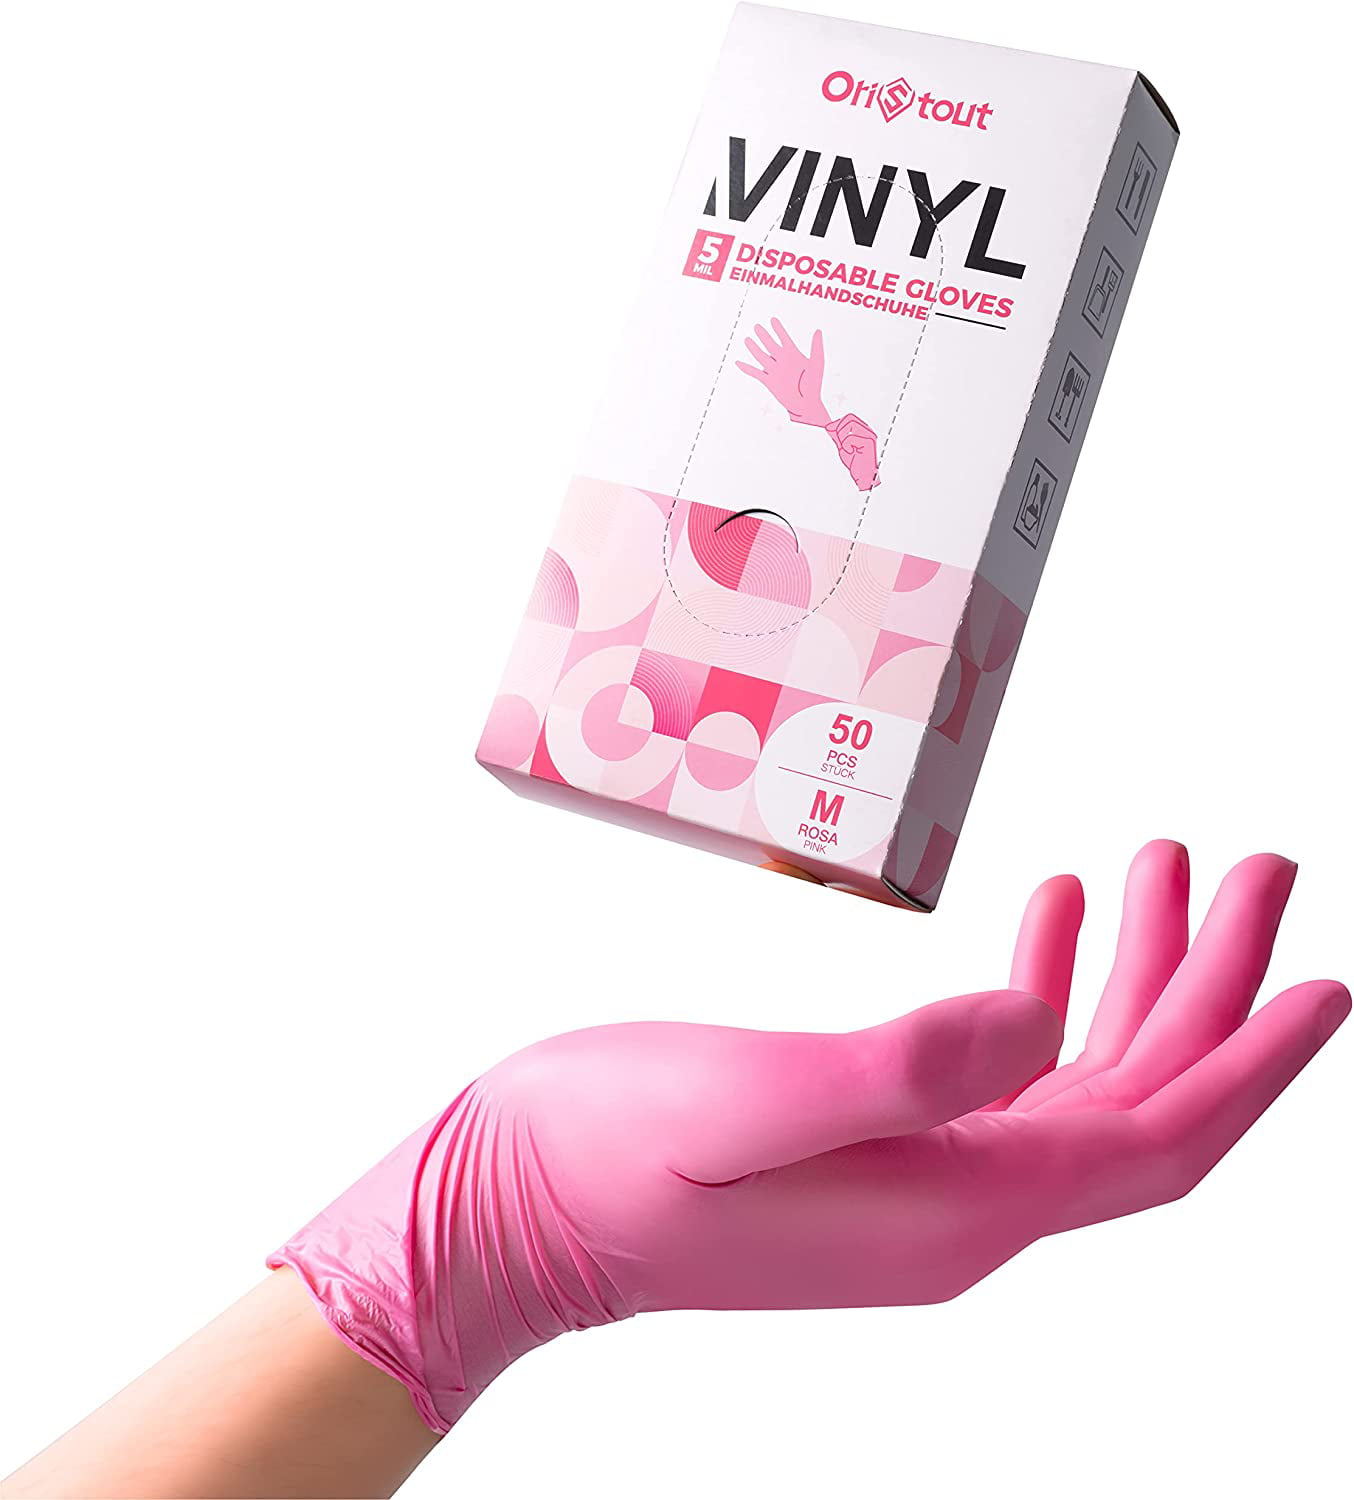 Details about   500 Clear Disposable Poly Gloves Size Medium Powder-Free Latex-Free 394DISPM 